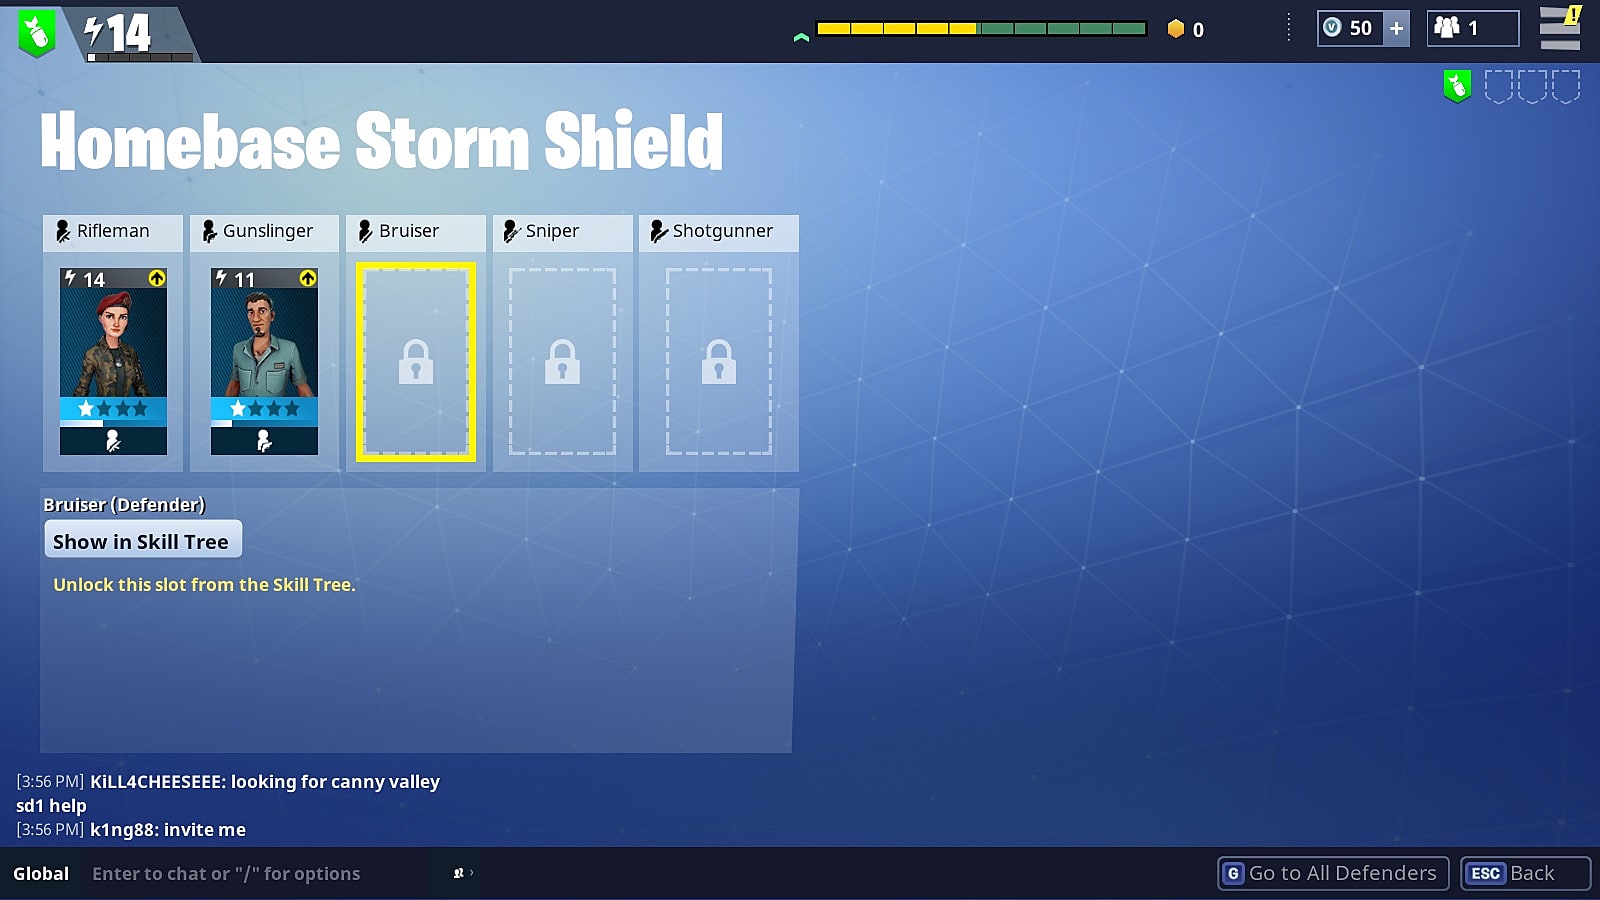 picking defenders for the homebase storm shield - shield one fortnite stats